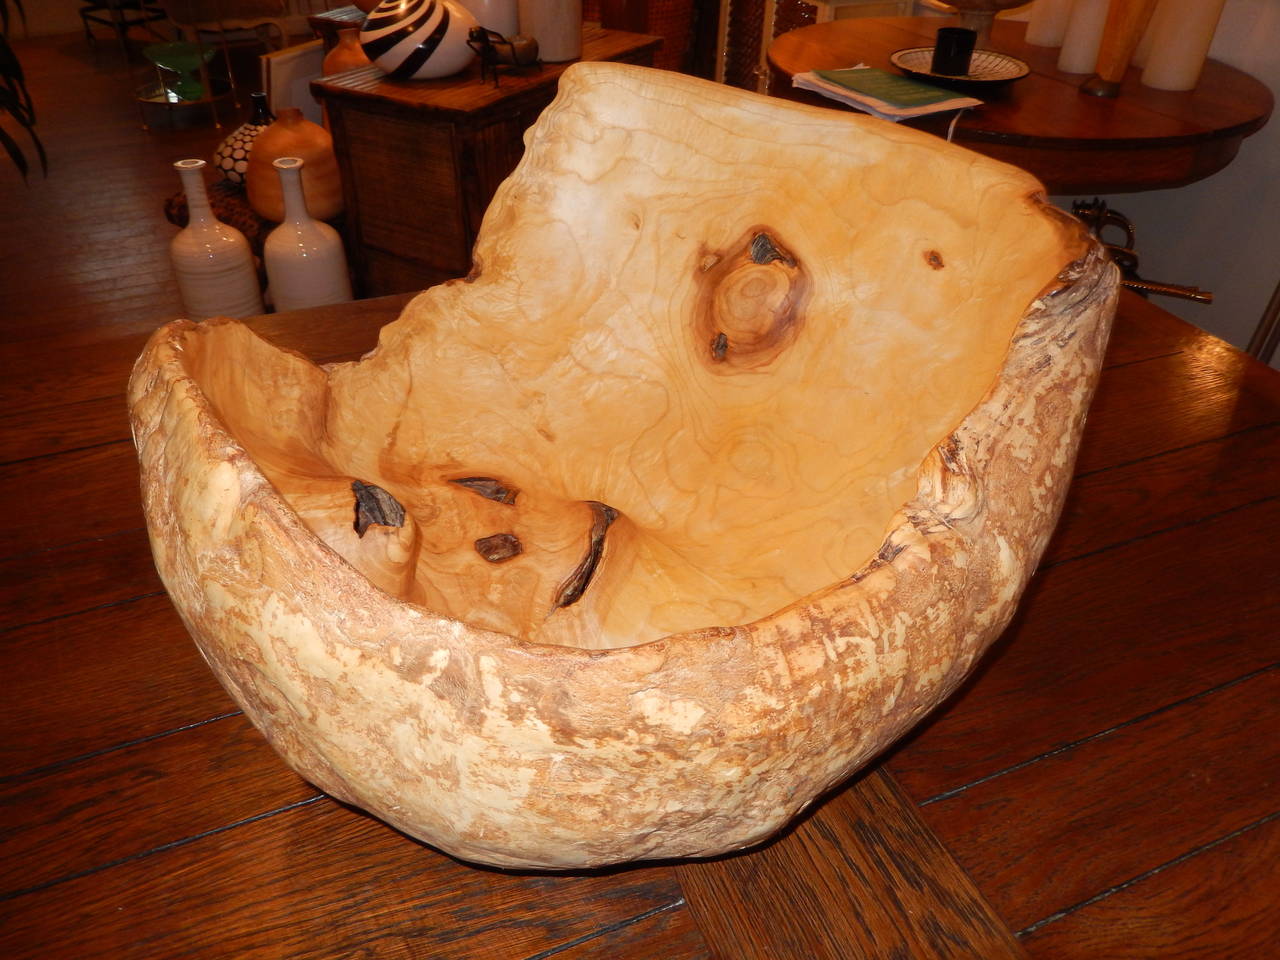 An extraordinary free-form large maple and burl wood vessel. At its highest point the bowl measures 14 inches high and at its lowest 6 inches high.
The unique form liken to a cracked egg. A wonderful center piece for any environment.